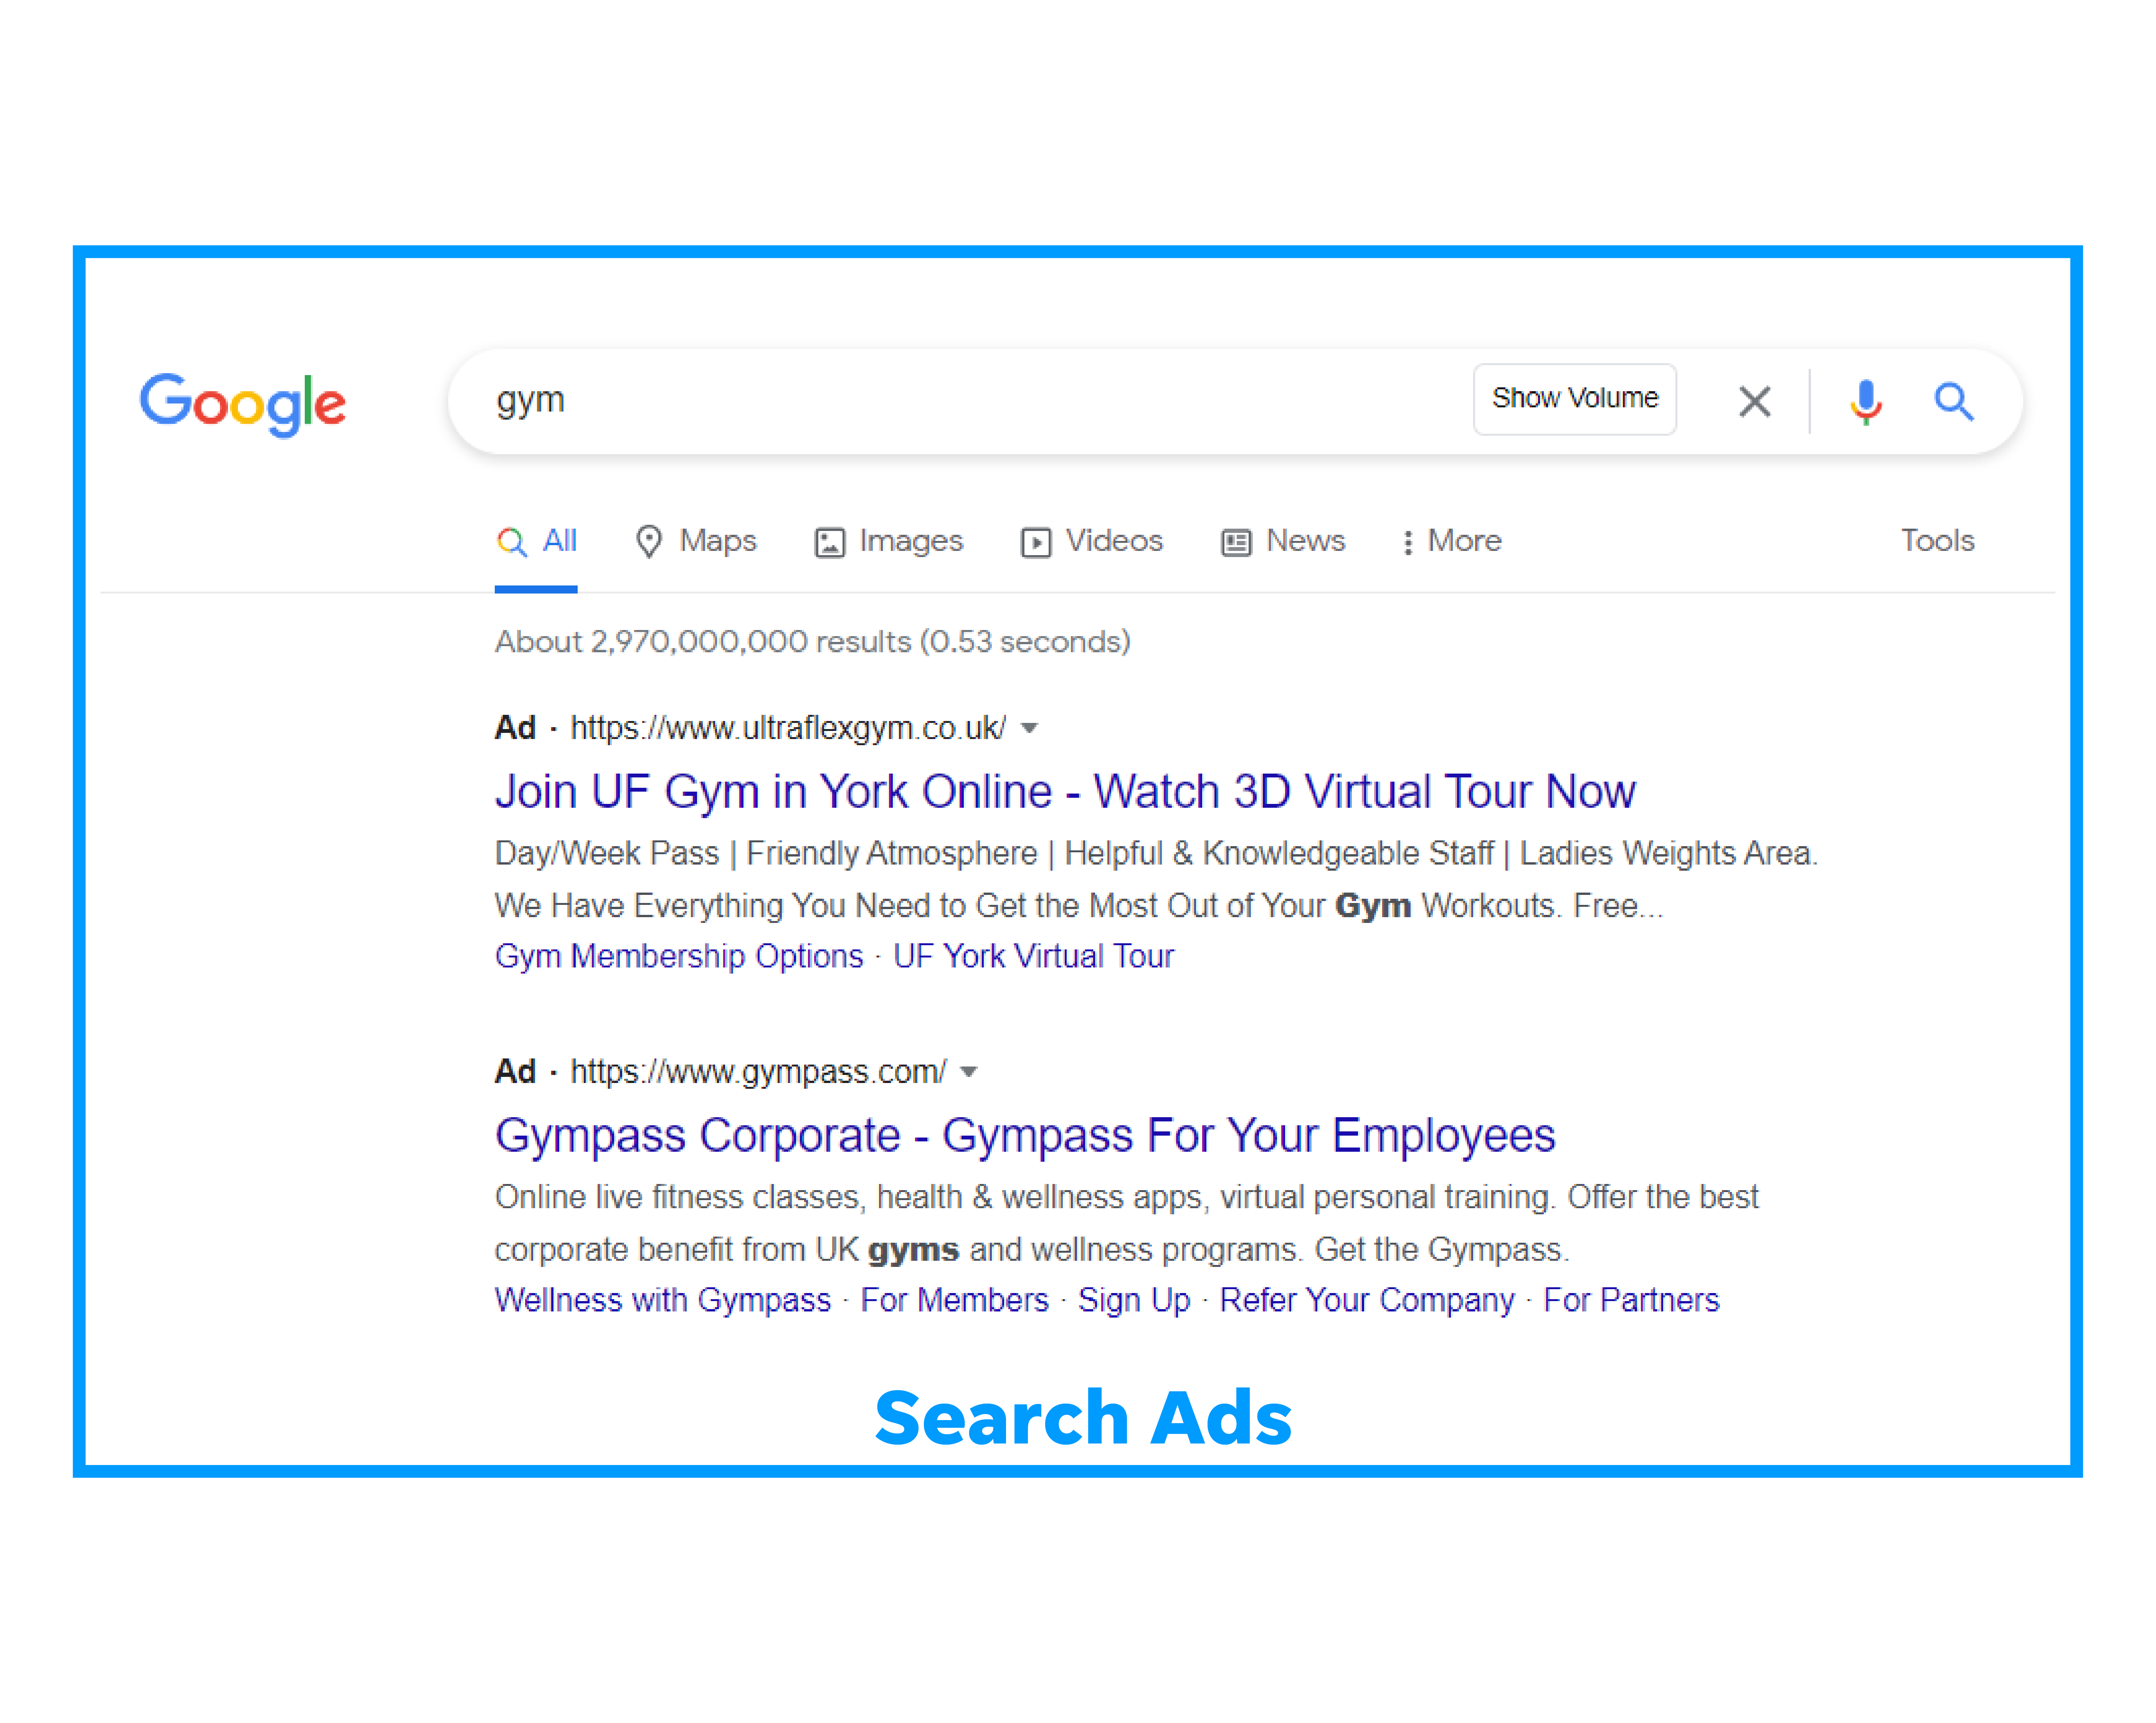 Example of Google search ads